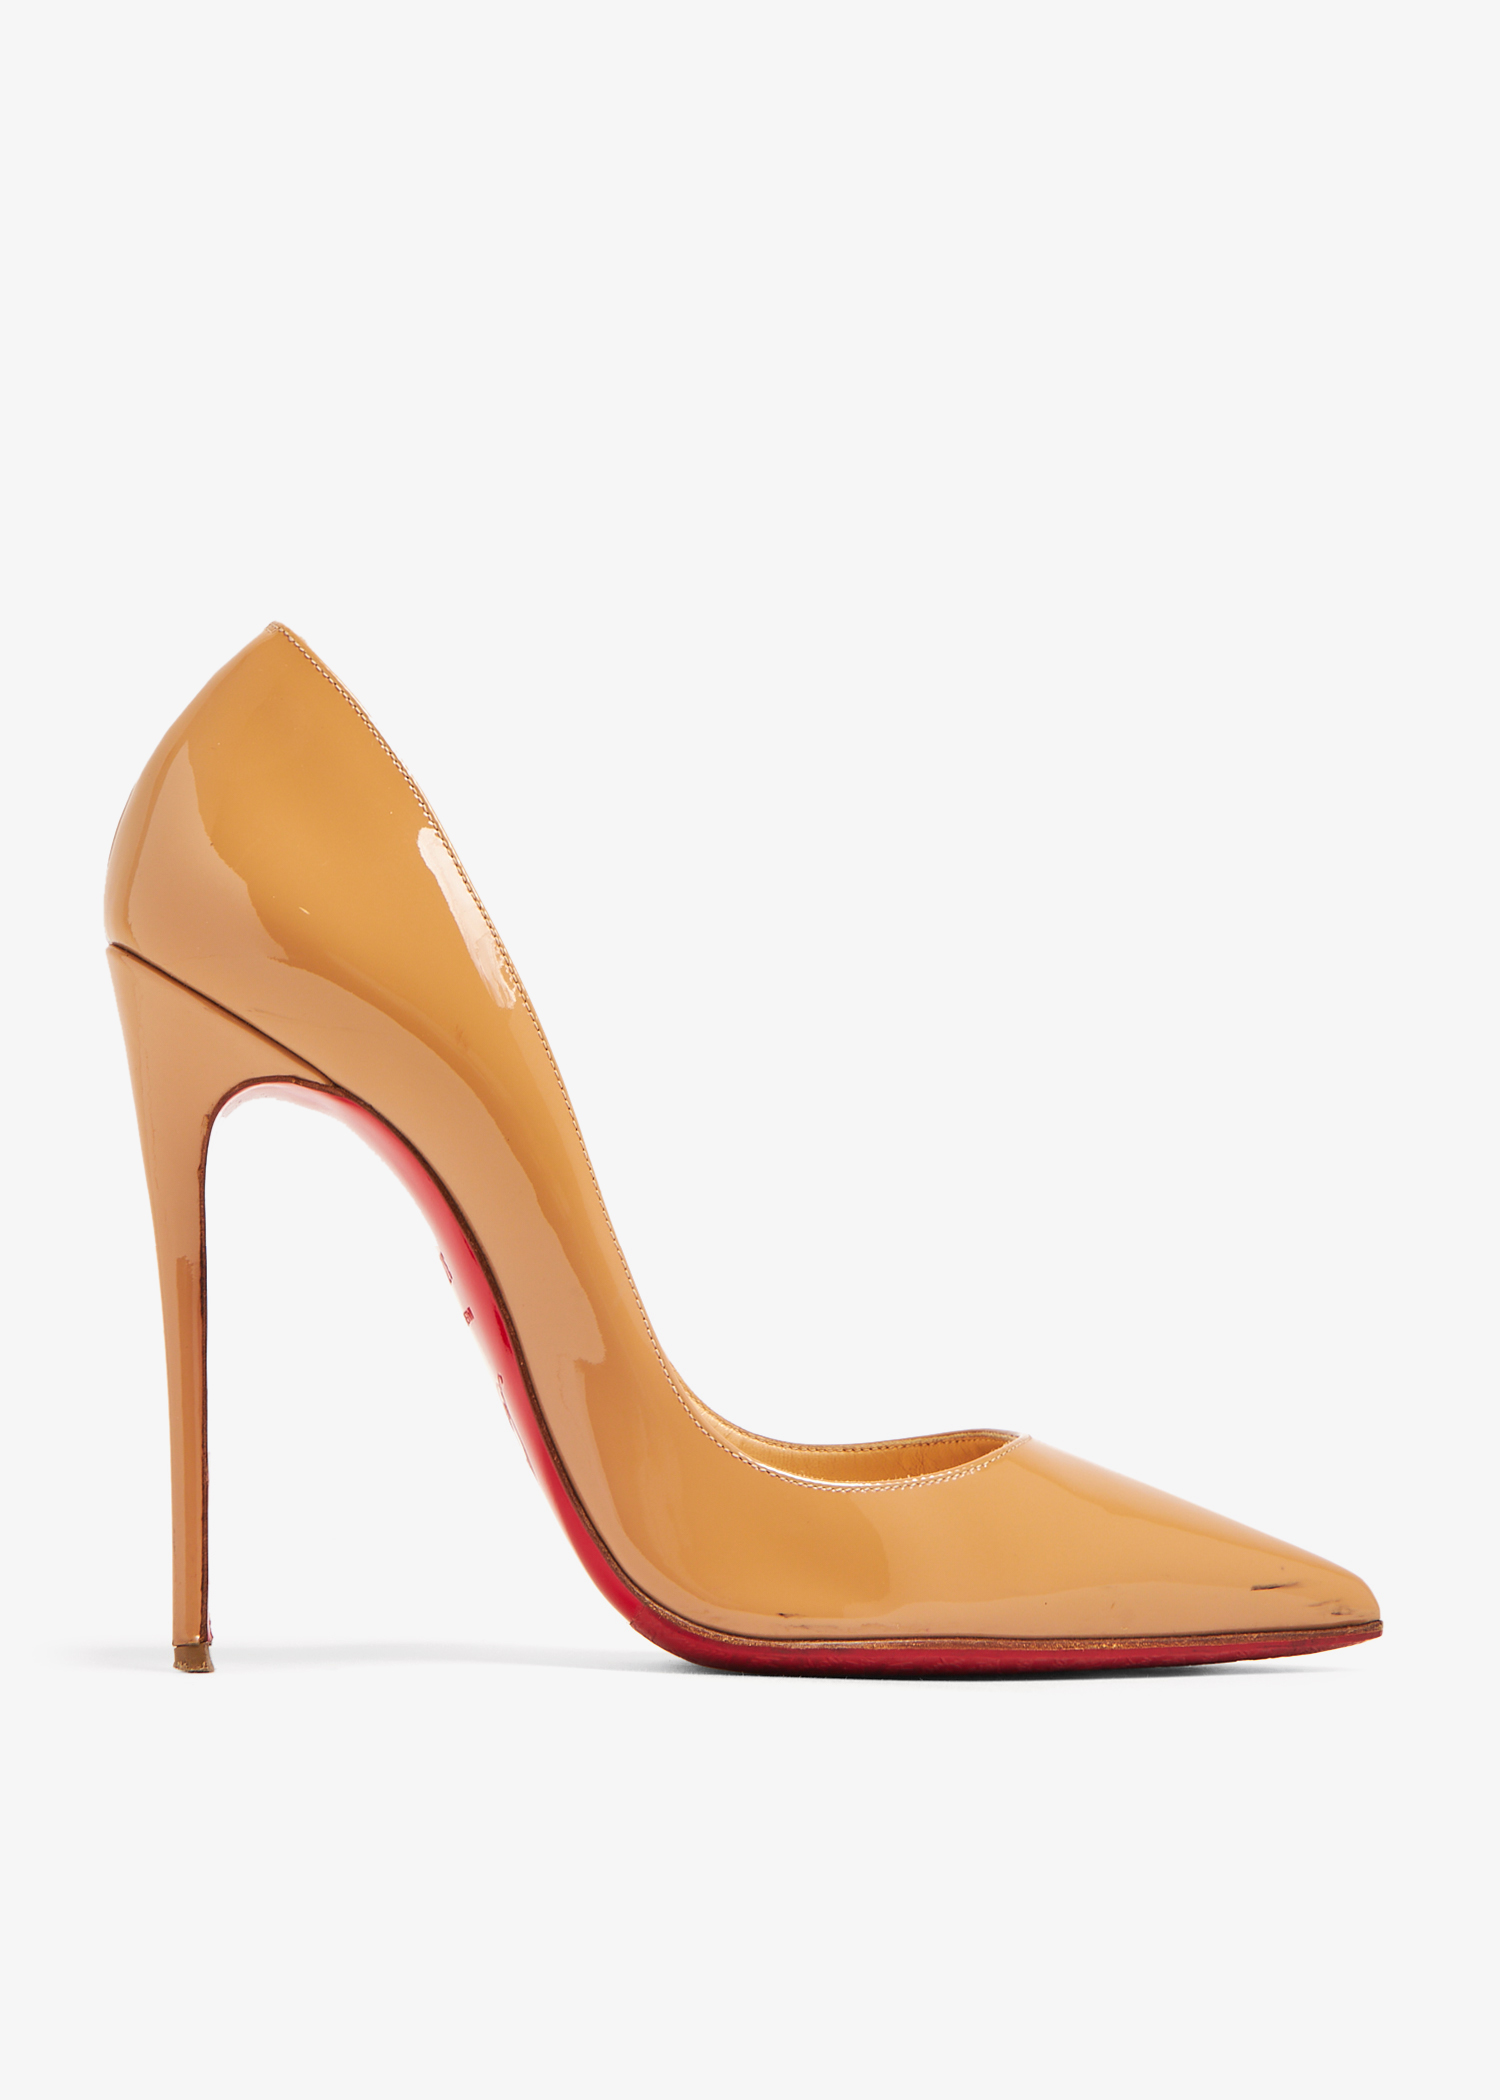 Christian Louboutin Pre-Loved So Kate 120 pumps for Women - Yellow